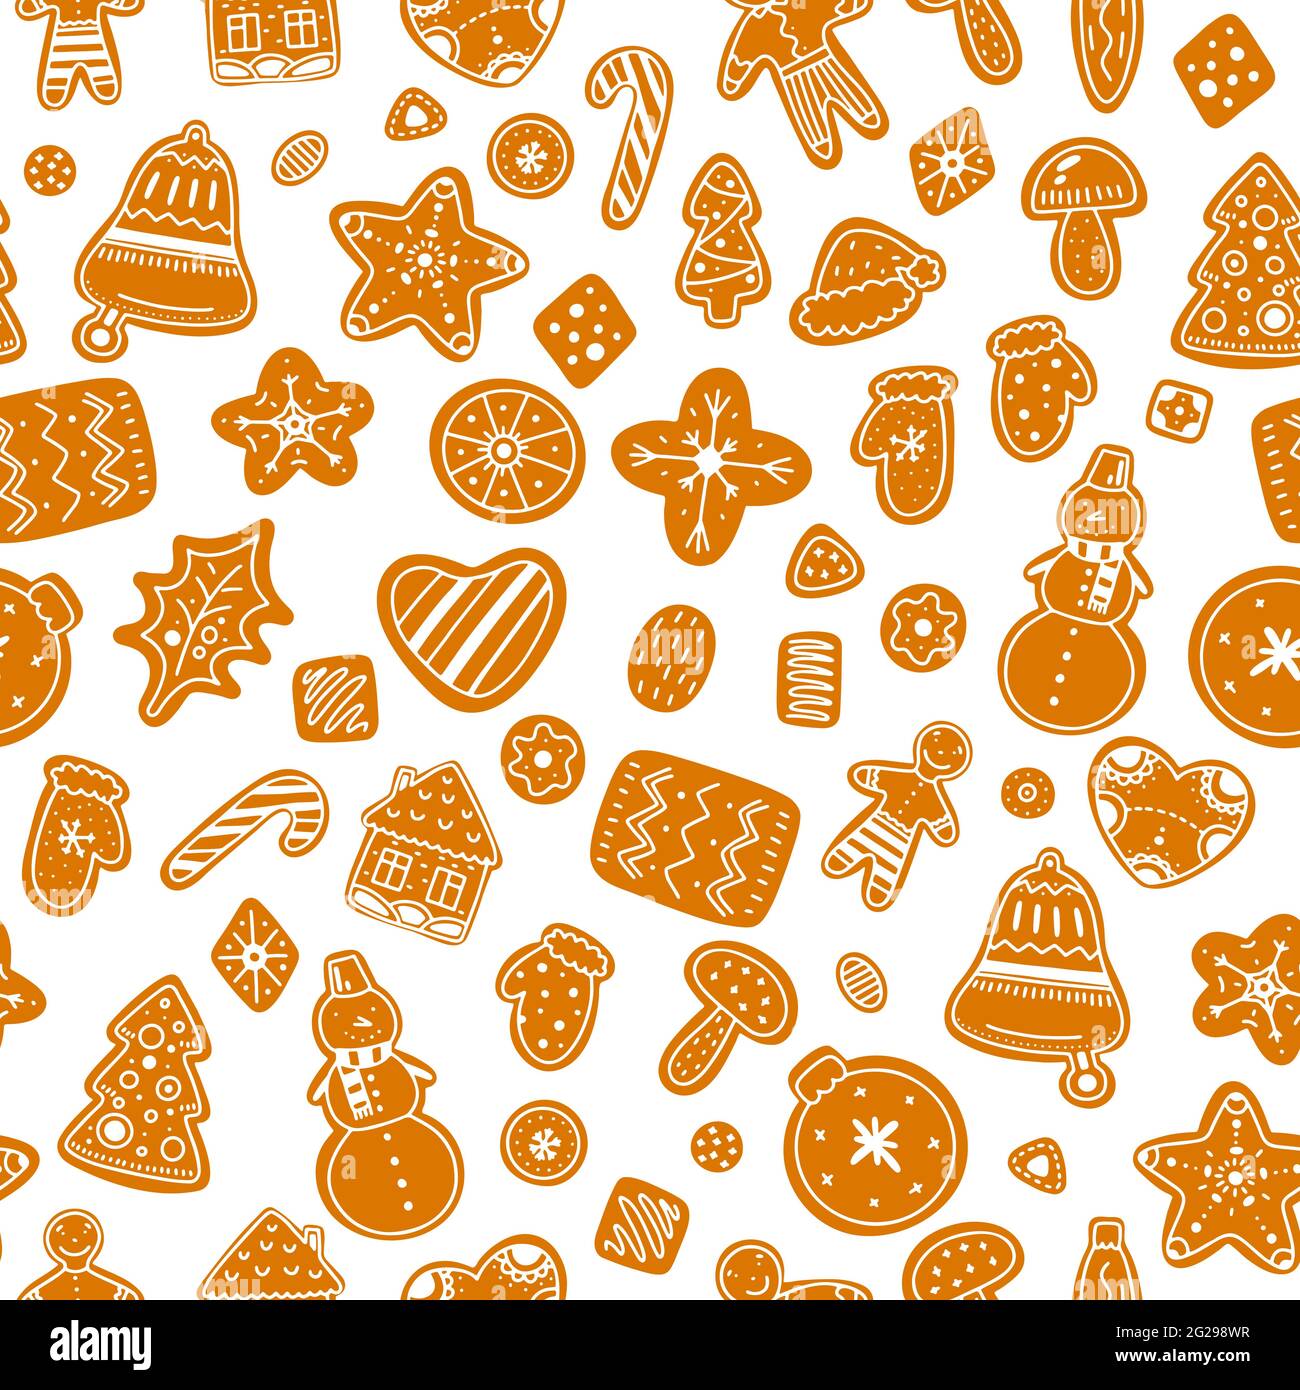 Seamless Cartoon Christmas gingerbread cookie pattern. Hand drawn pastries on white background. Baked Christmas tree, star, snowflake, man, house. Hom Stock Vector